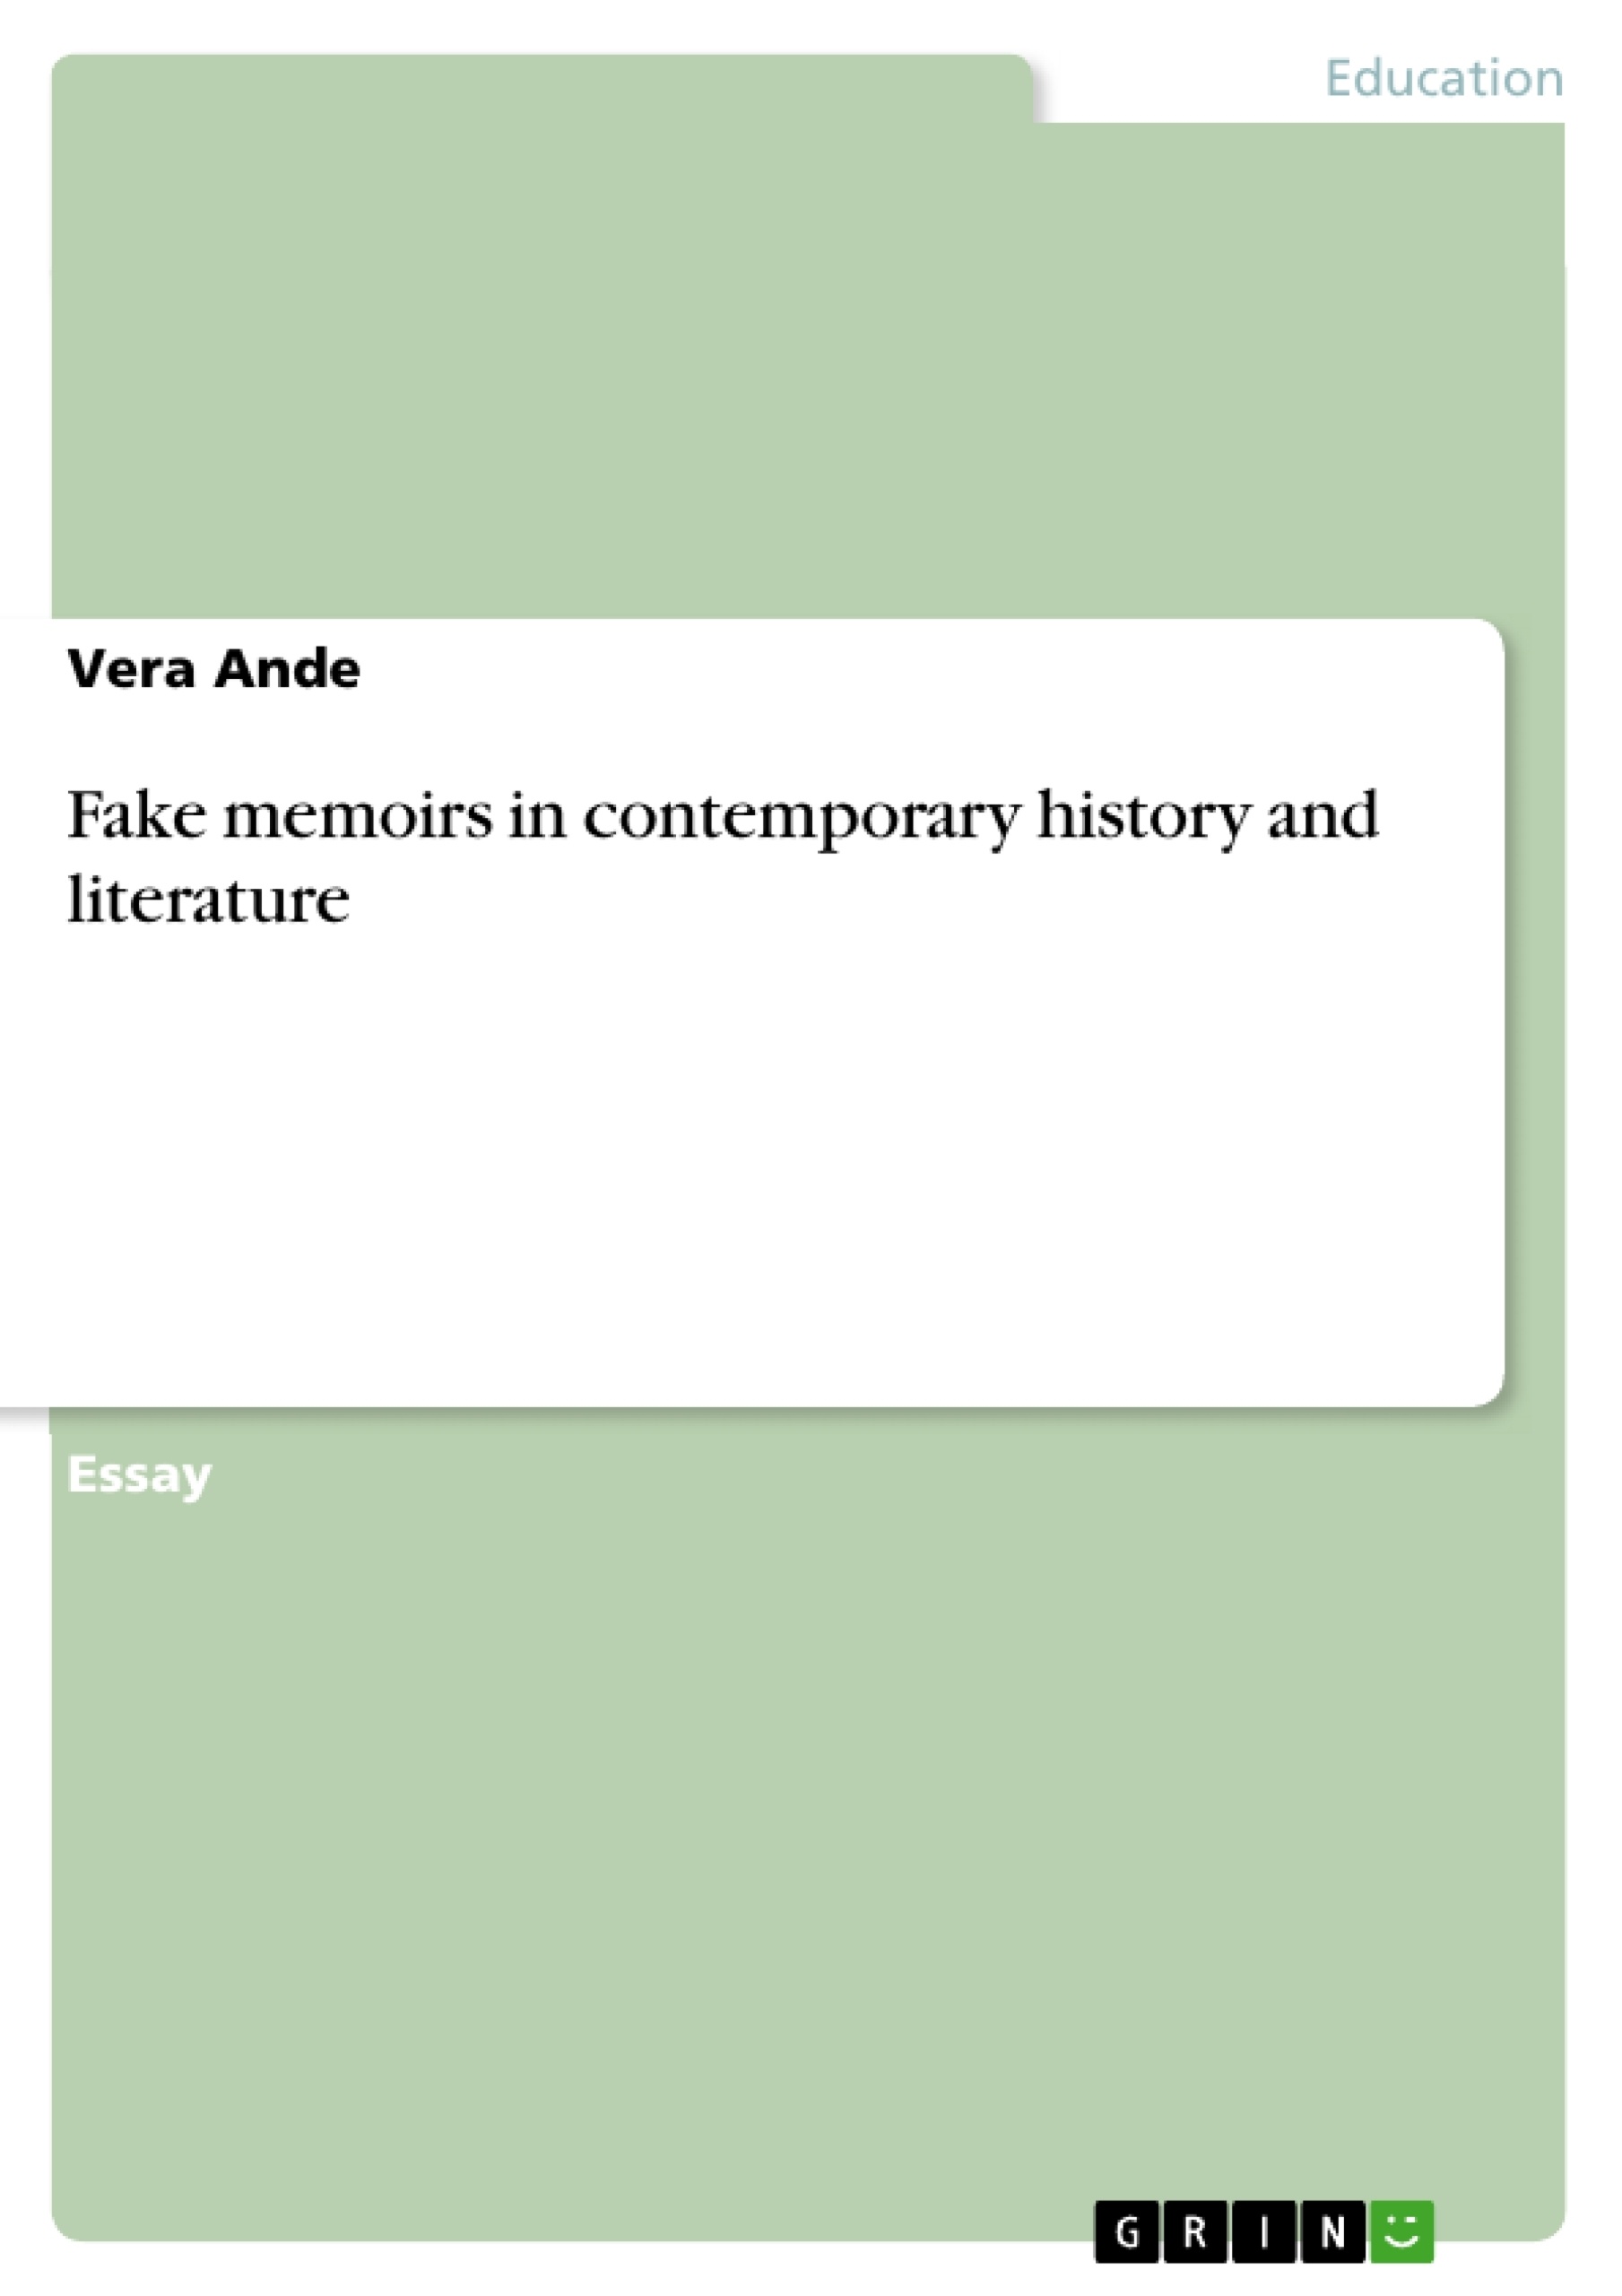 Título: Fake memoirs in contemporary history and literature